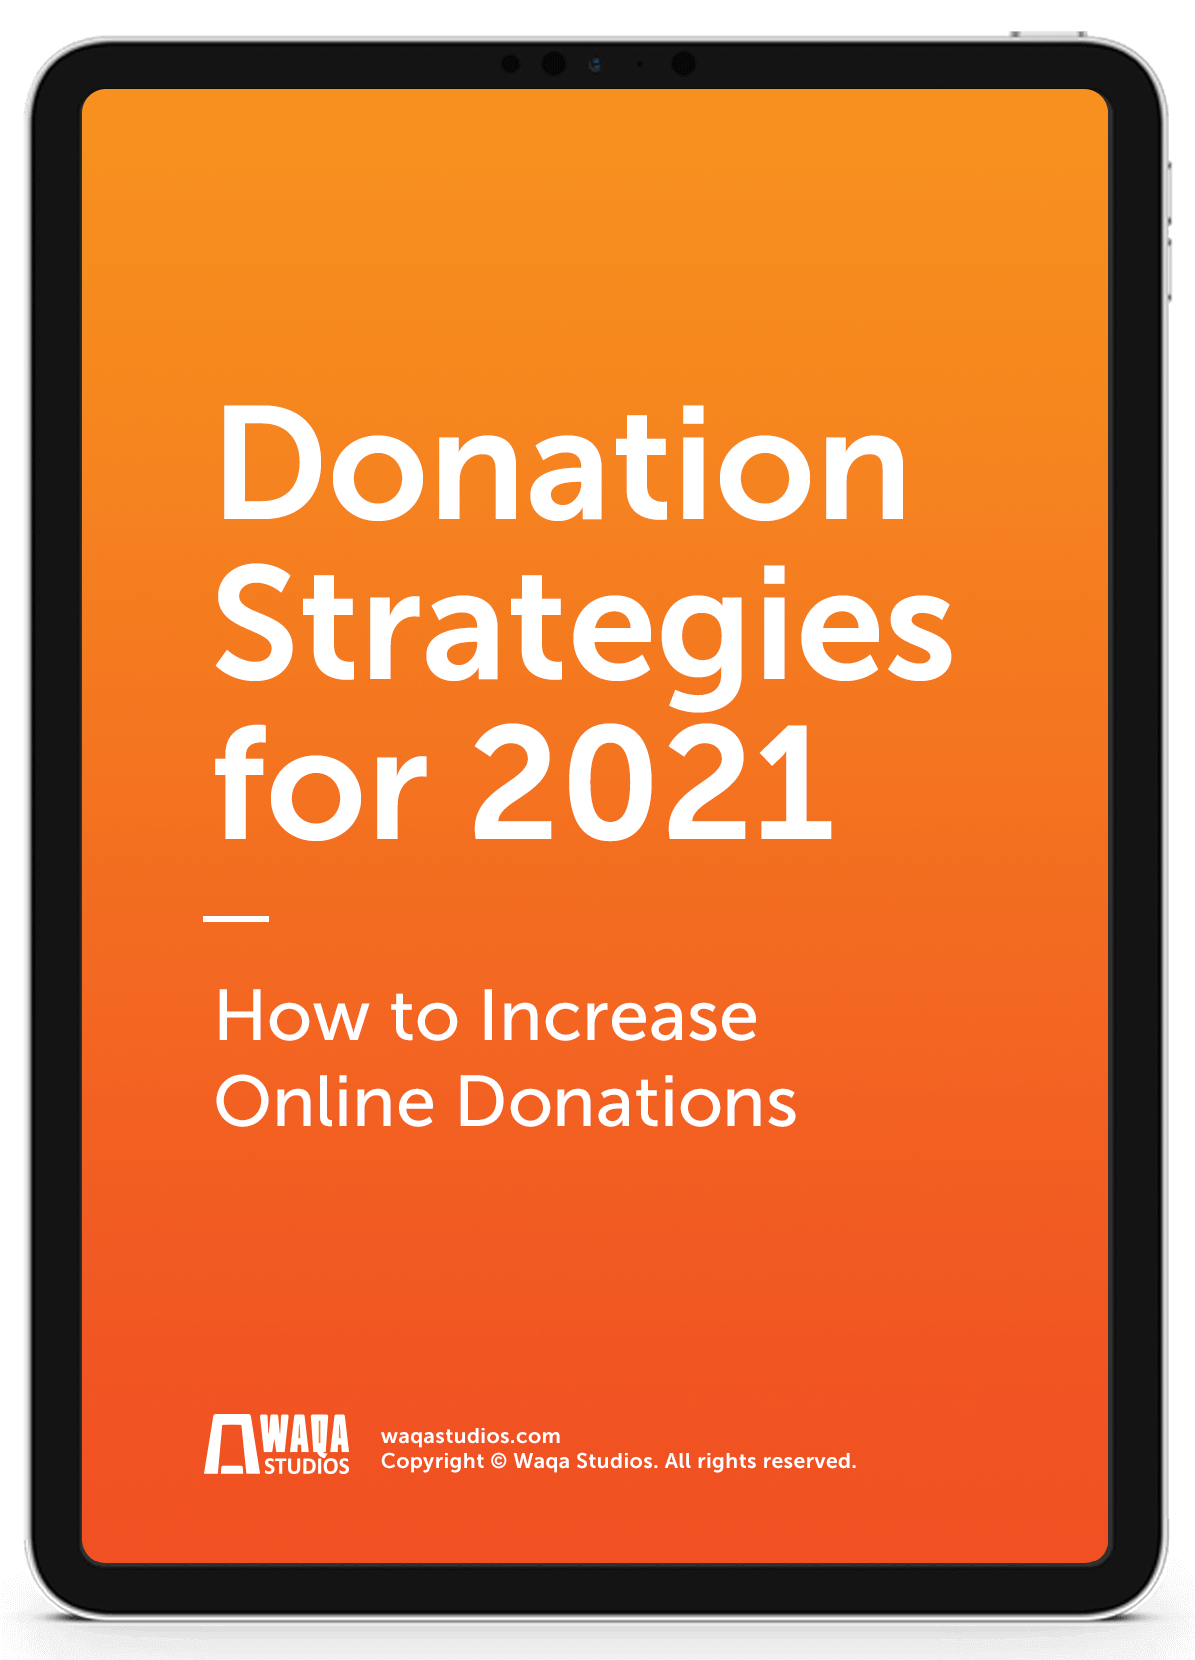 Donation Strategies for 2021/22 - Free Download guide for nonprofits and charities